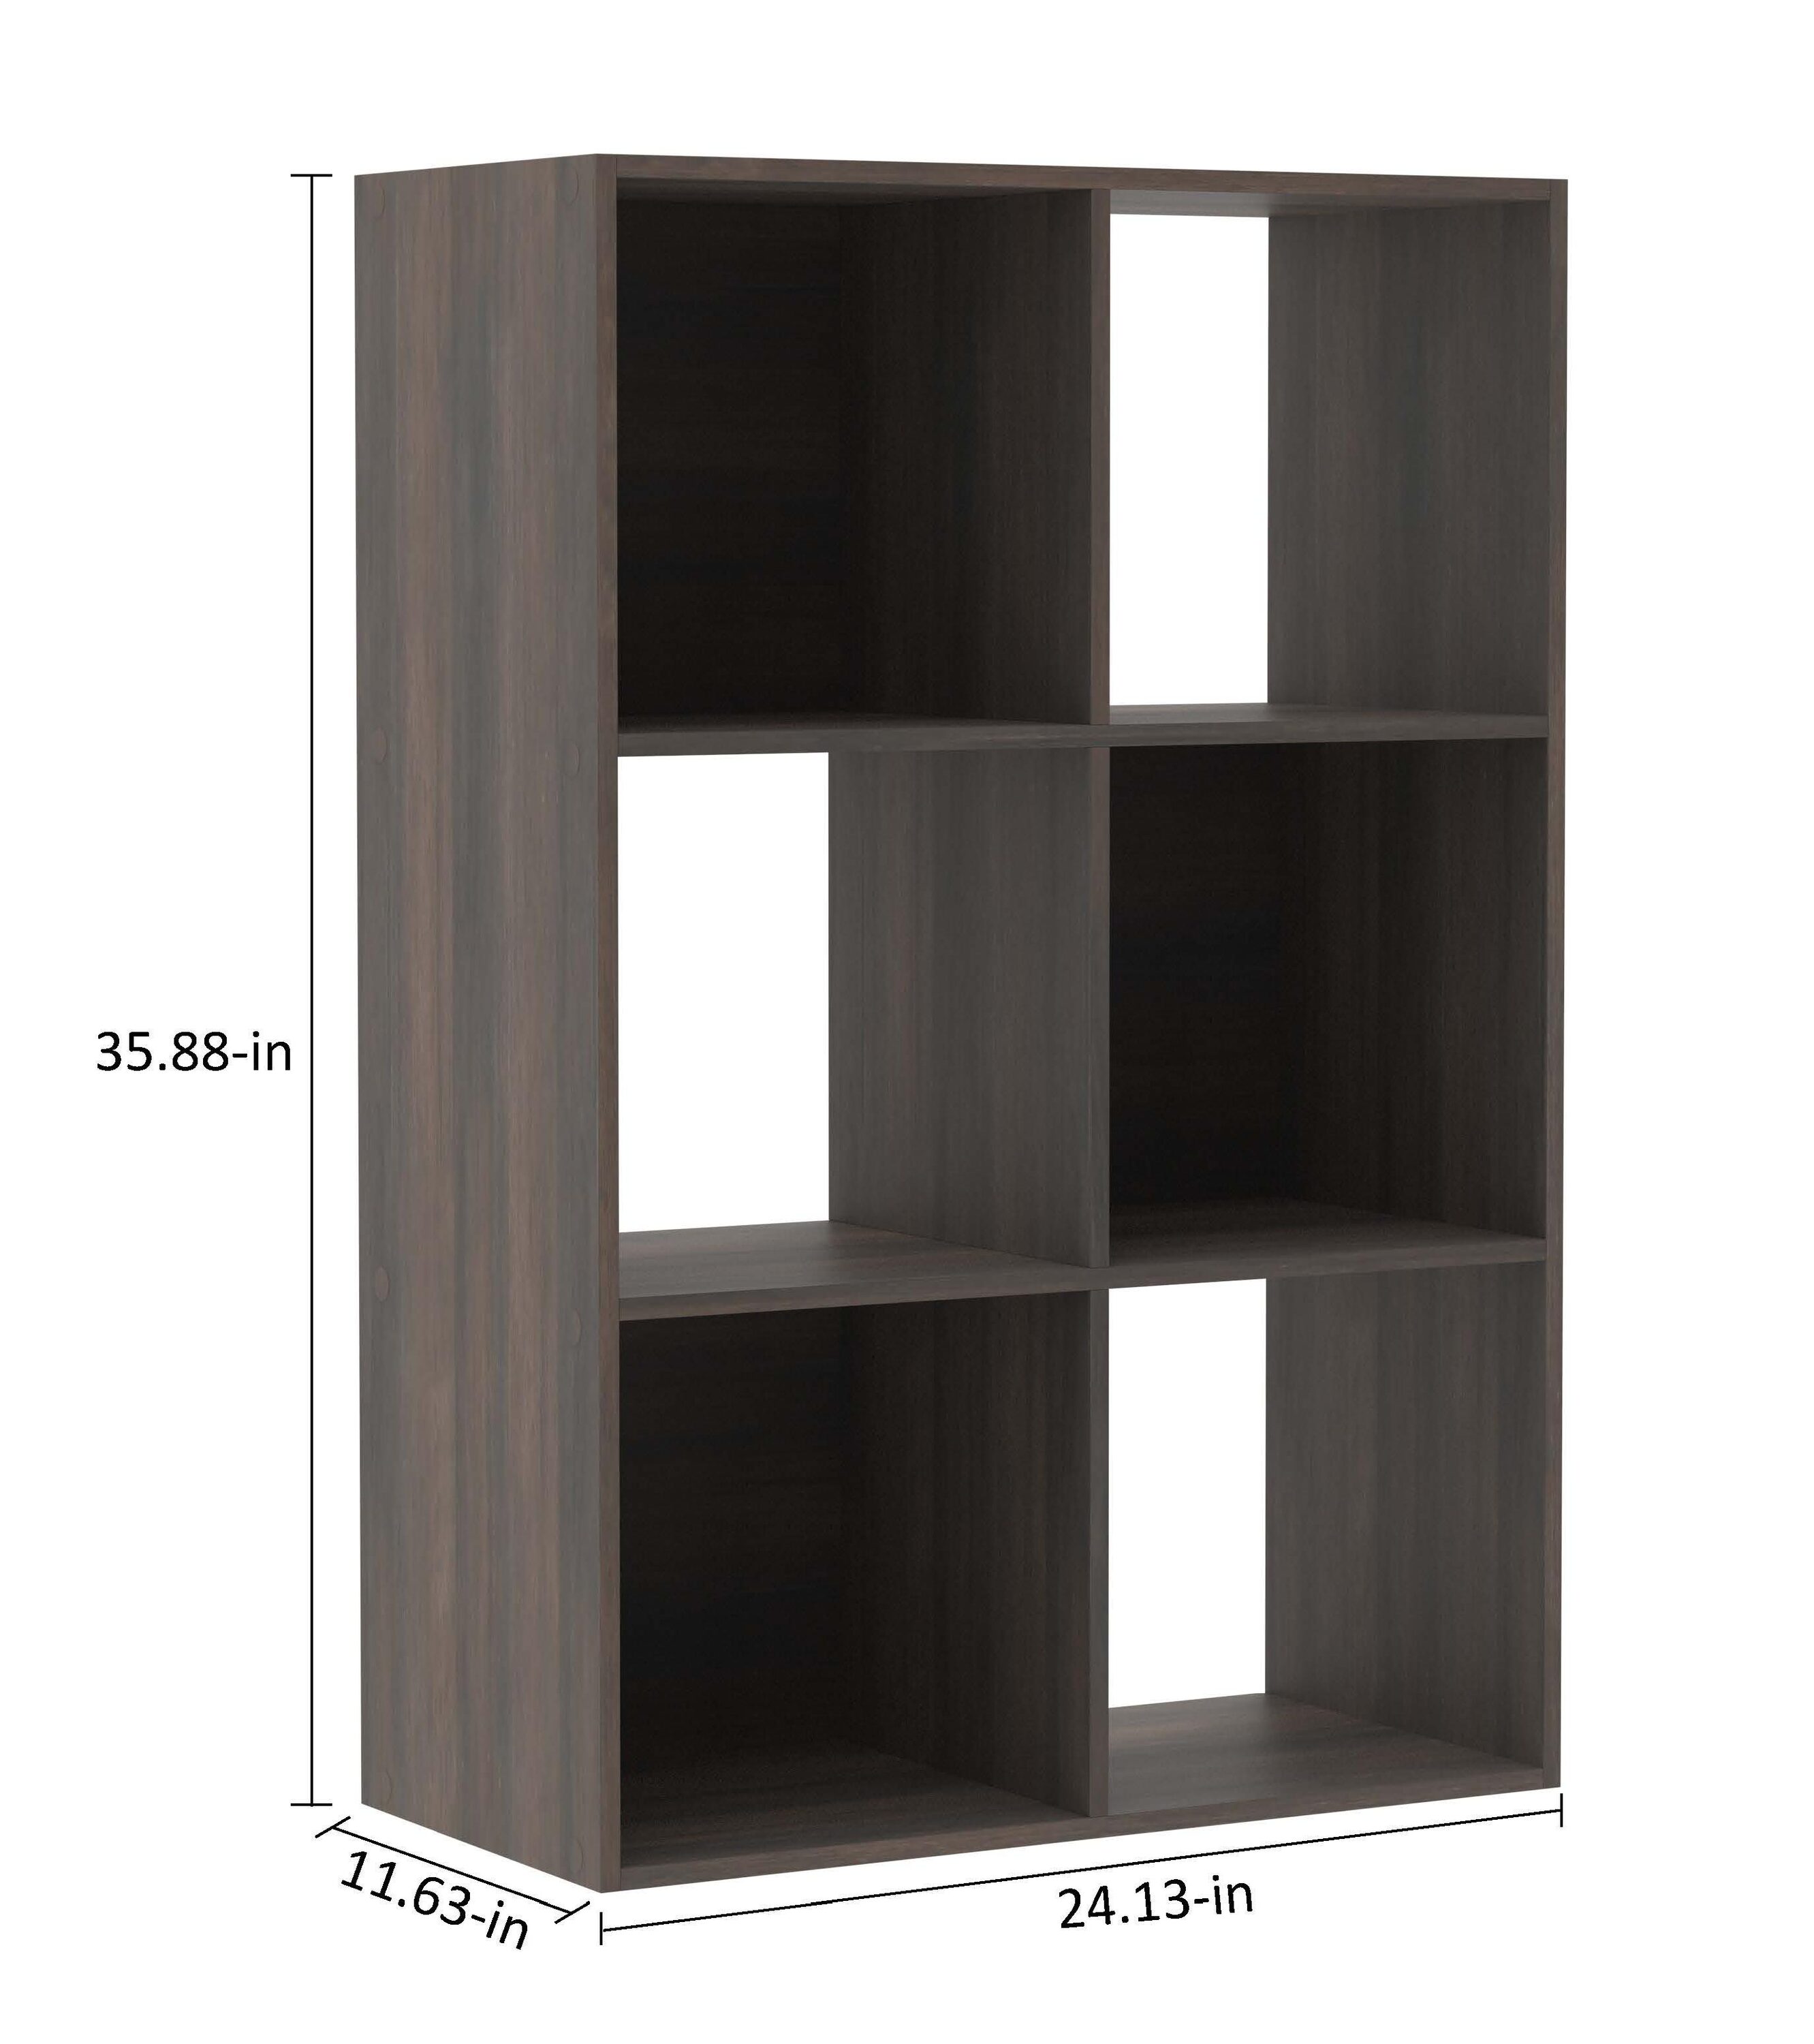 Style Selections 35.88-in H x 24.13-in W x 11.63-in D Dark Chocolate Stackable Wood Laminate 6 Cube Organizer in Brown | CL22-11ST6-ES